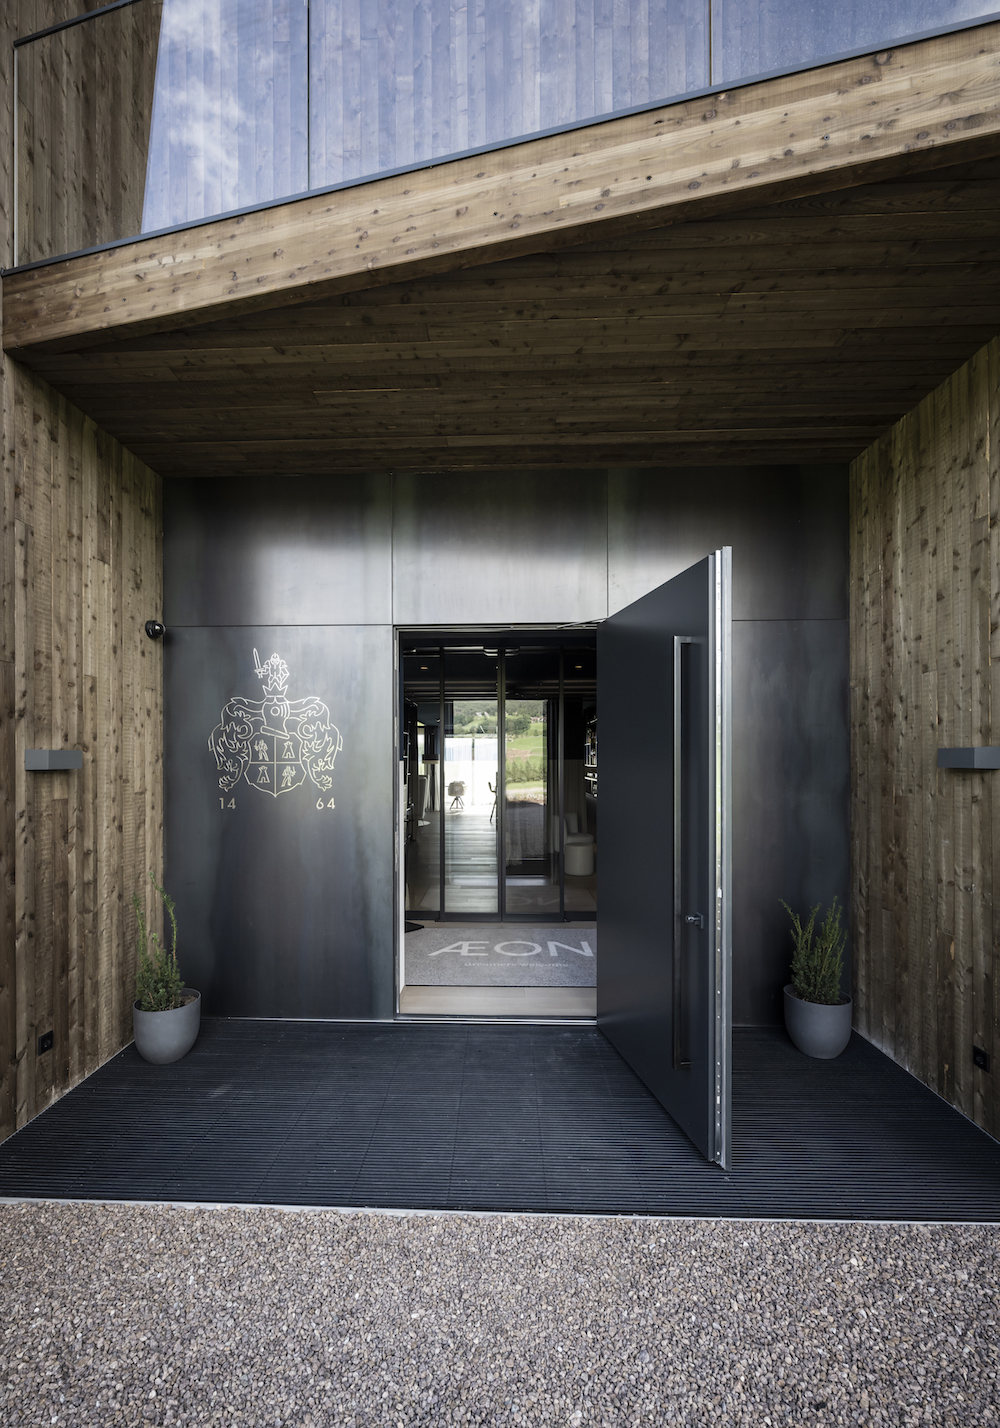 Entrance to the wellness hotel, Aeon, a minimalist hotel in the Italian countryside